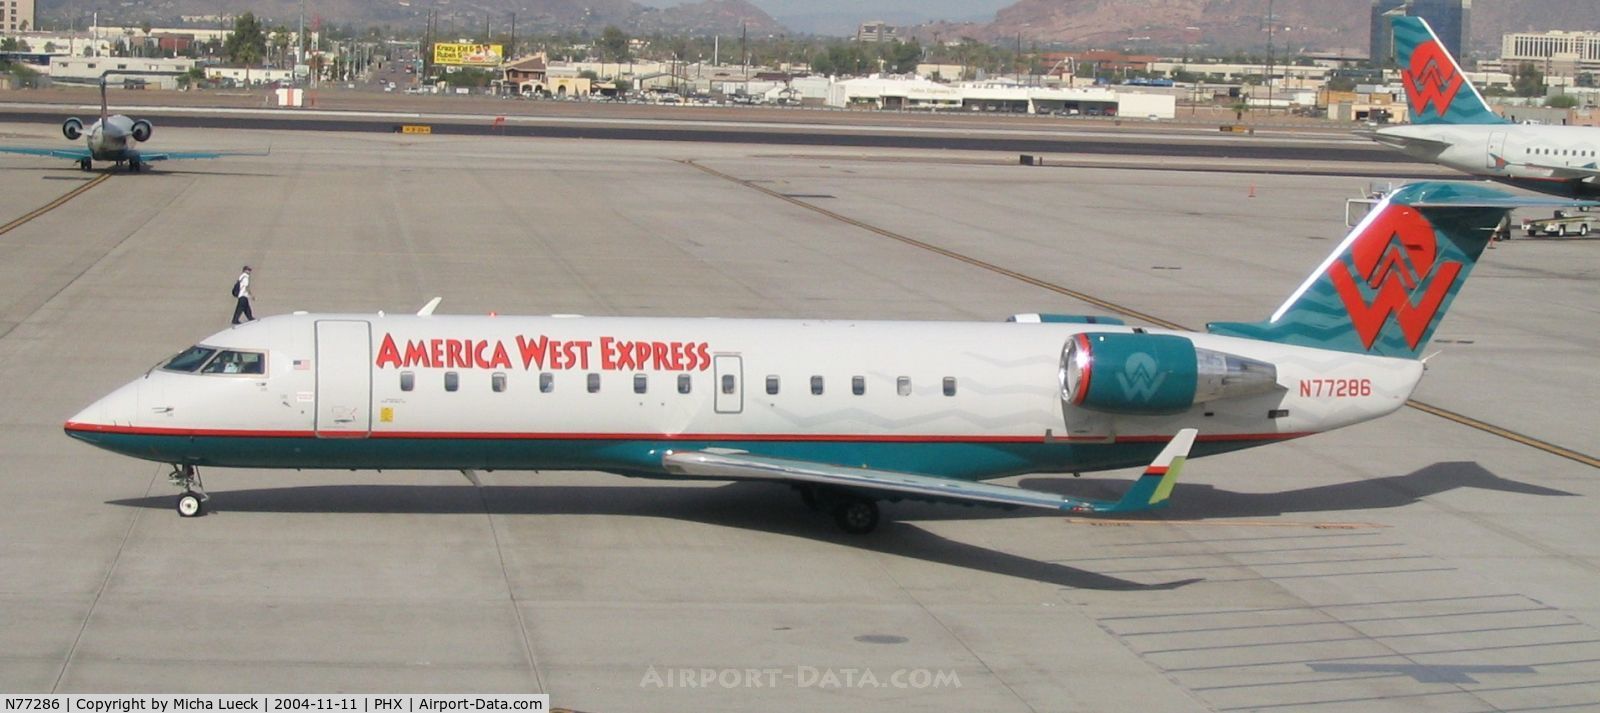 N77286, 1999 Bombardier CRJ-200LR (CL-600-2B19) C/N 7286, Mesa Airlines for America West Express